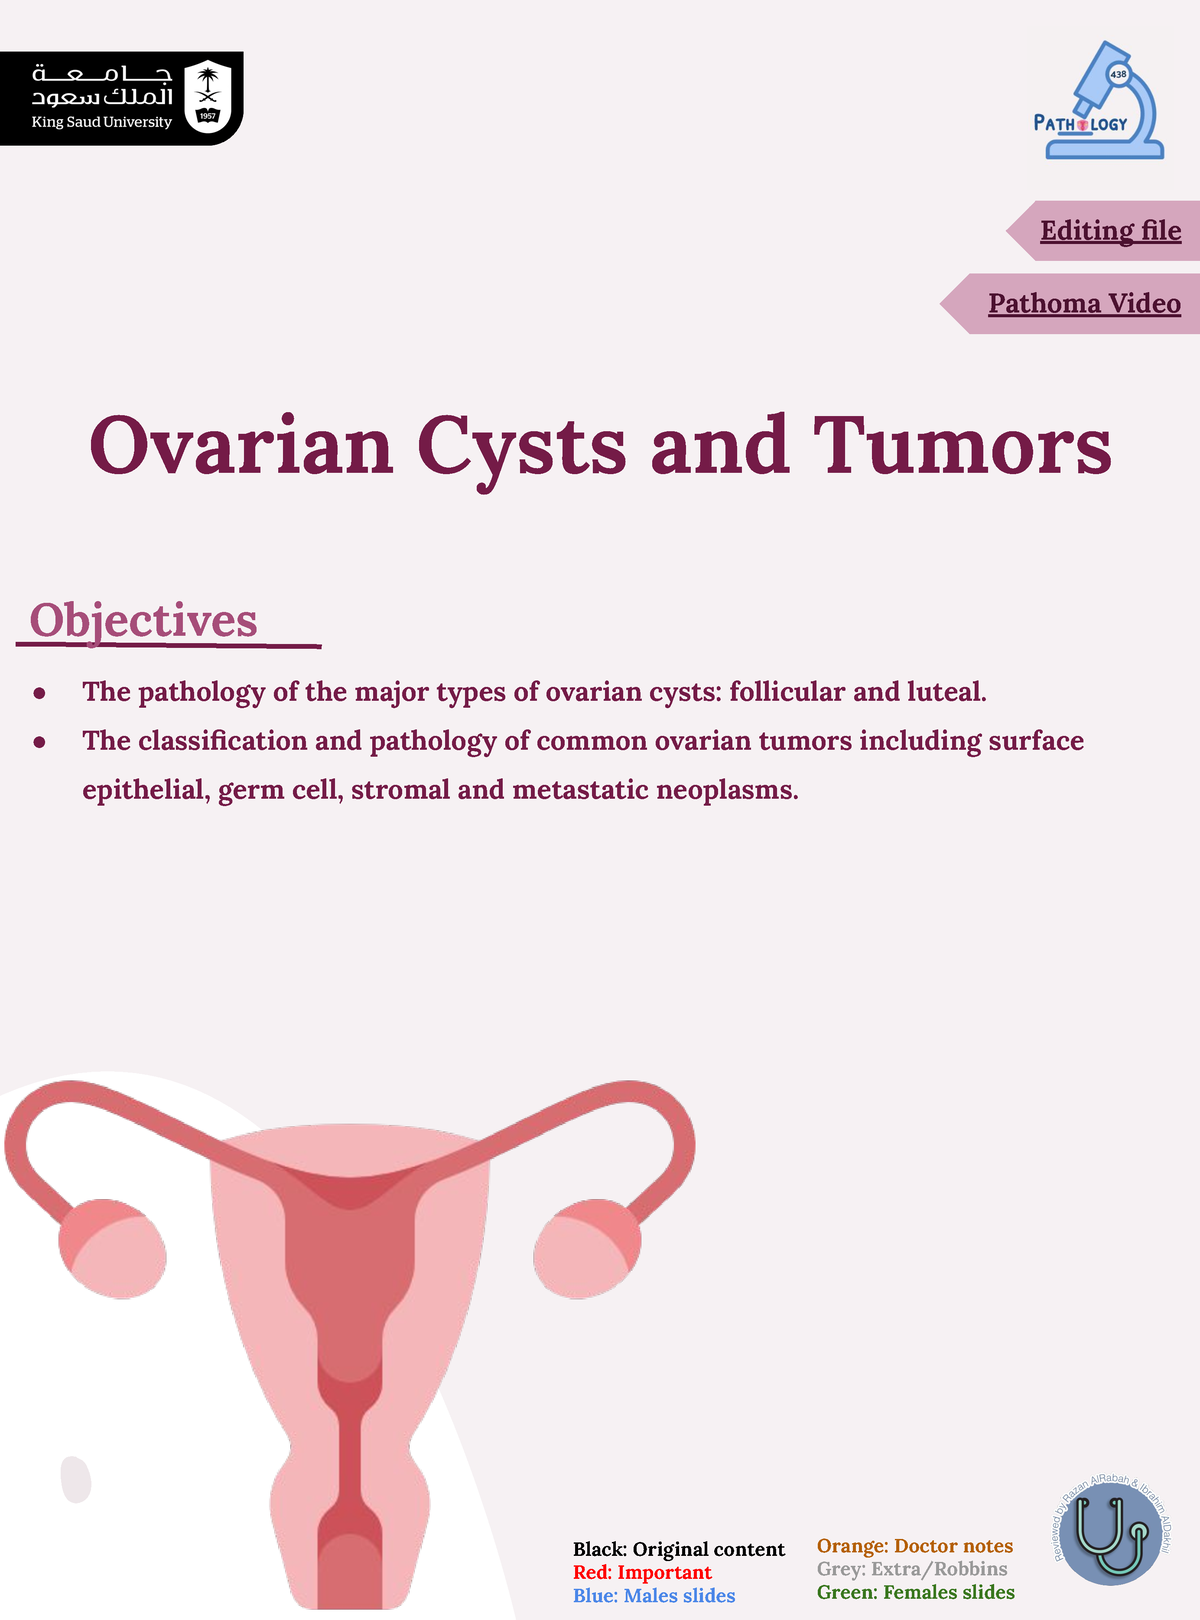 L2 Ovarian Cysts and Tumors - Black: Original content Red: Important ...